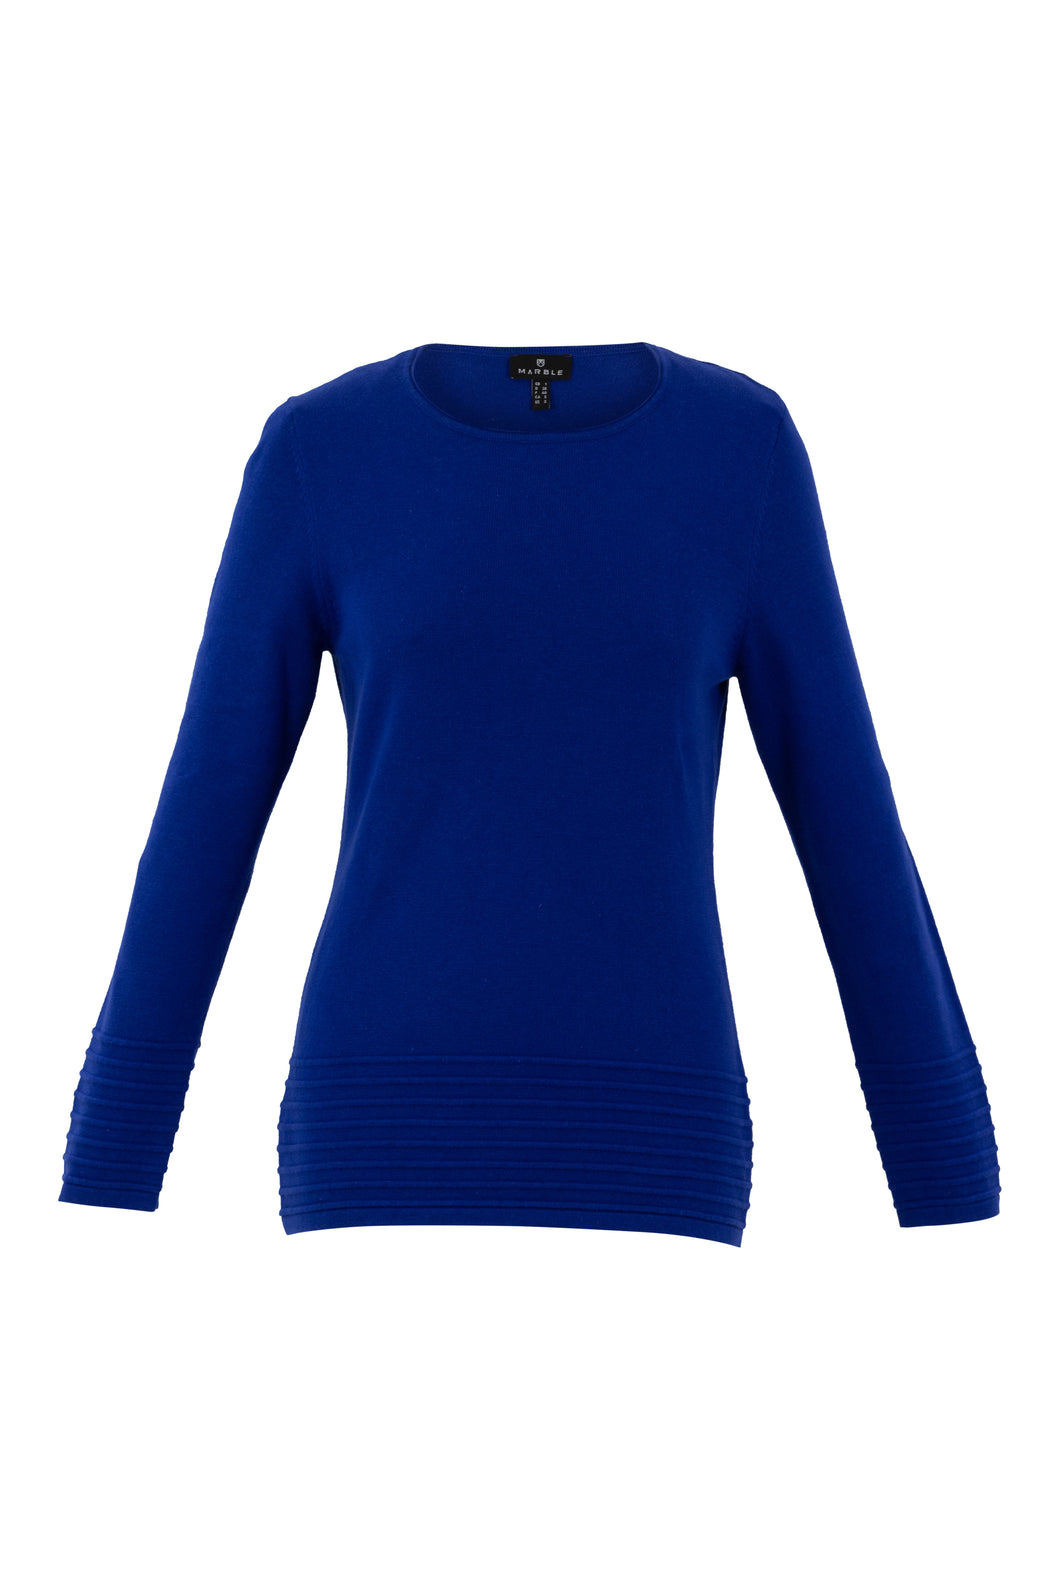 MARBLE FASHIONS 6377 SWEATER COLOUR 210 - ROYAL BLUE